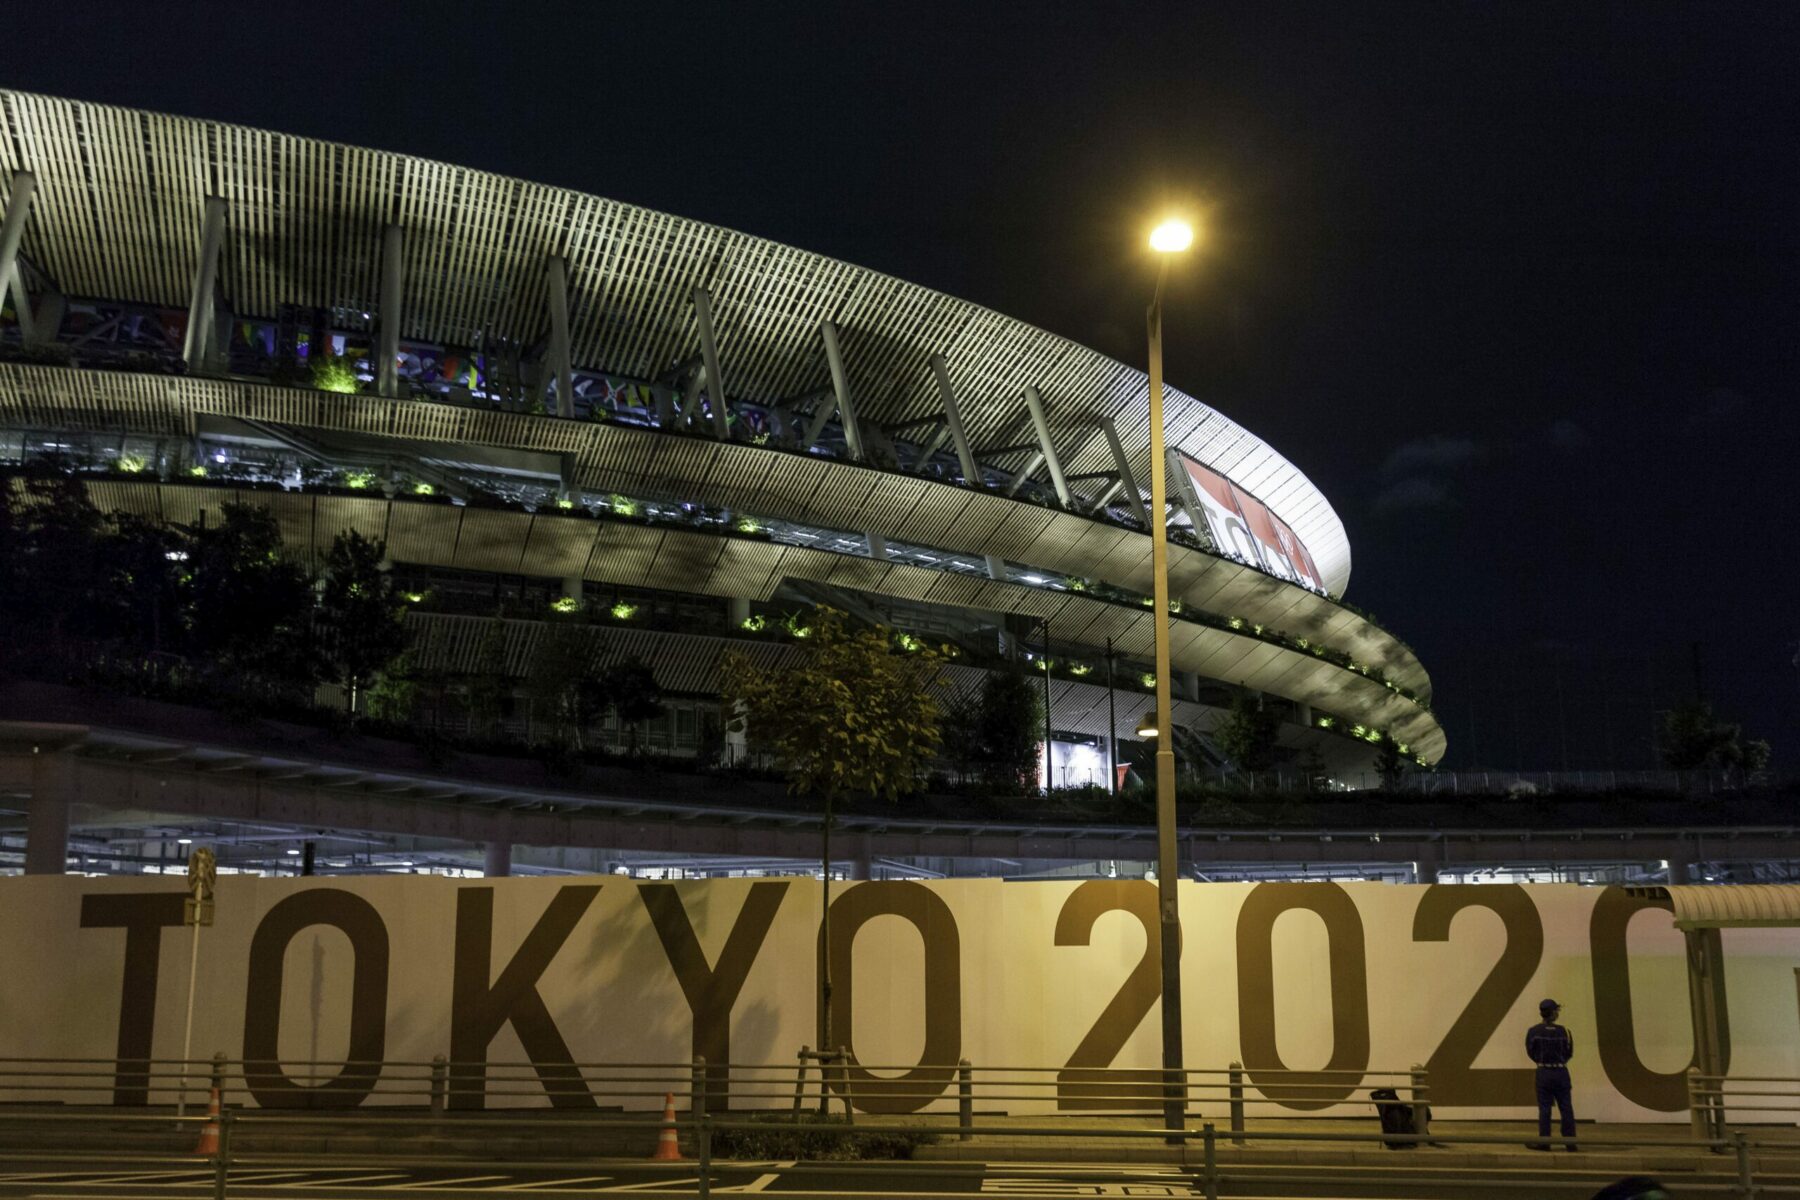 The outside of the Olympic Stadium in Tokyo at night.